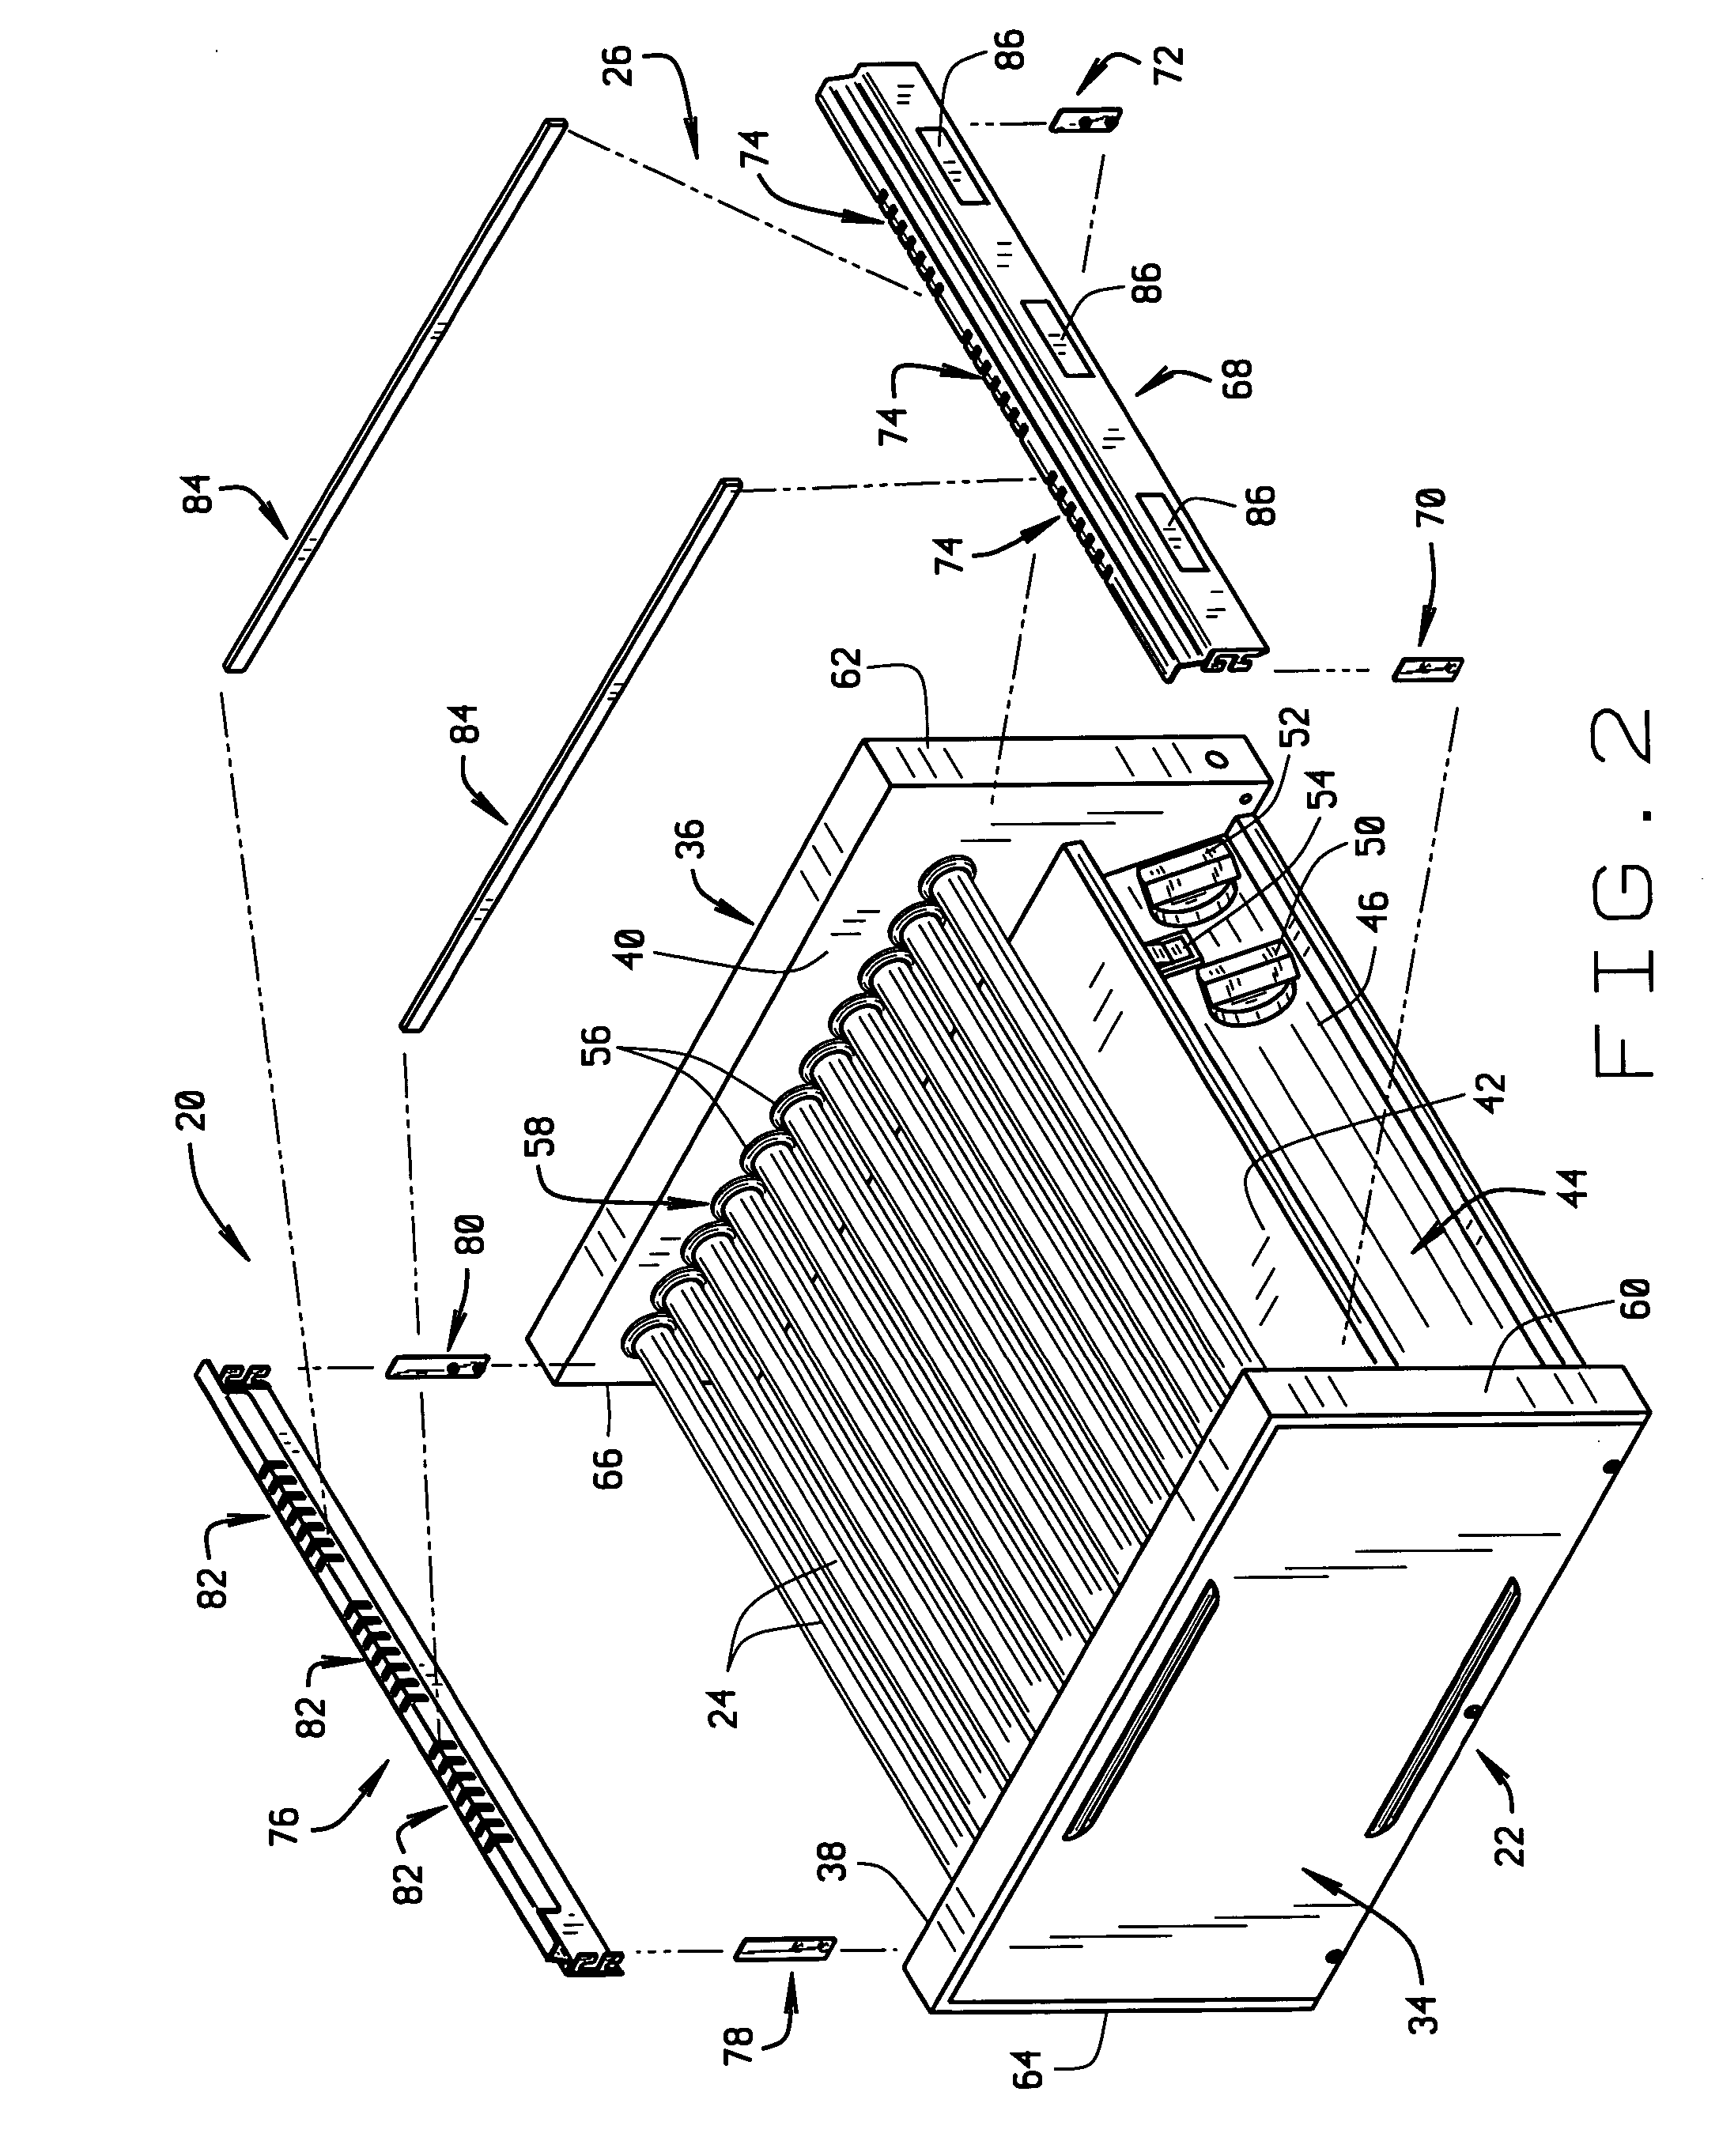 Section divider ensemble for roller grill for cooking human food